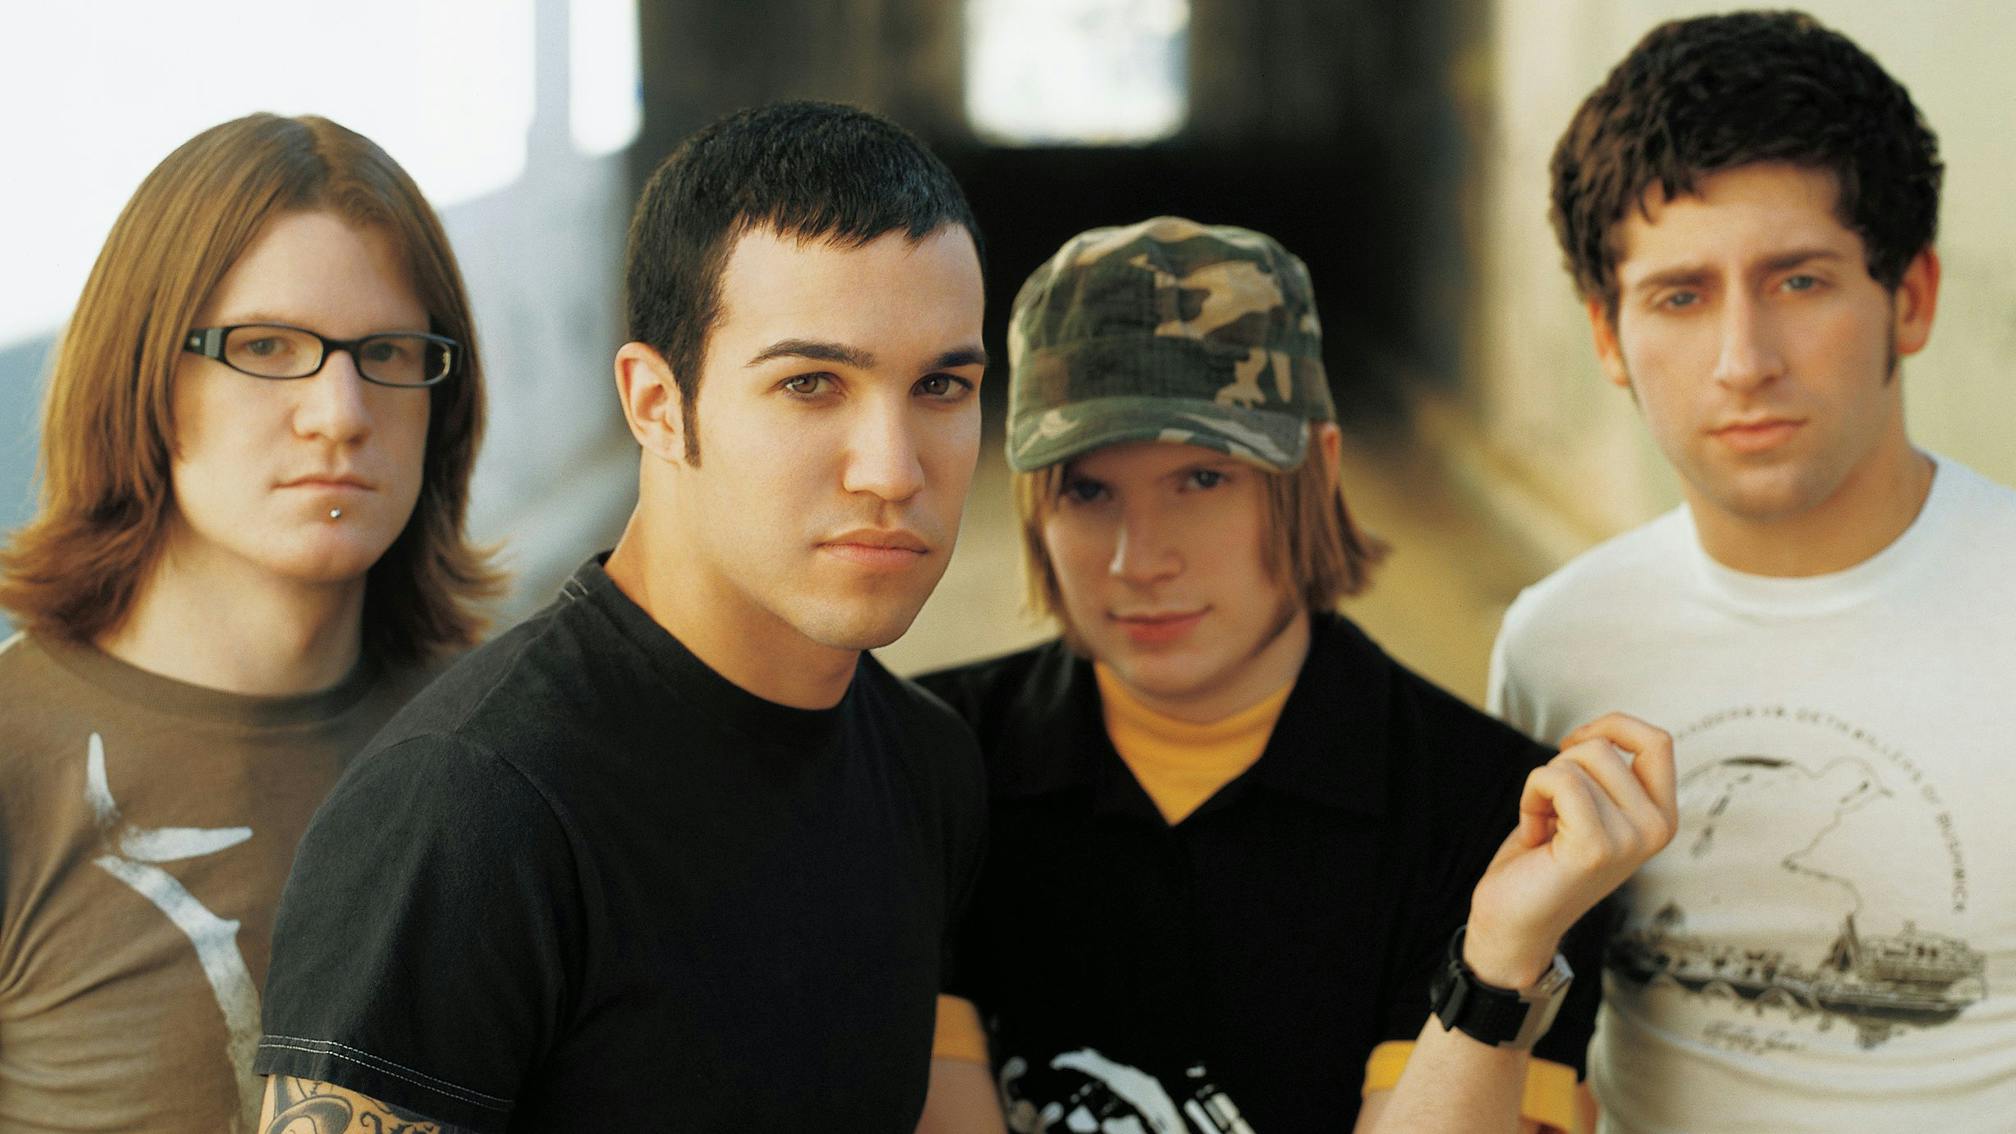 The 20 greatest Fall Out Boy songs – ranked